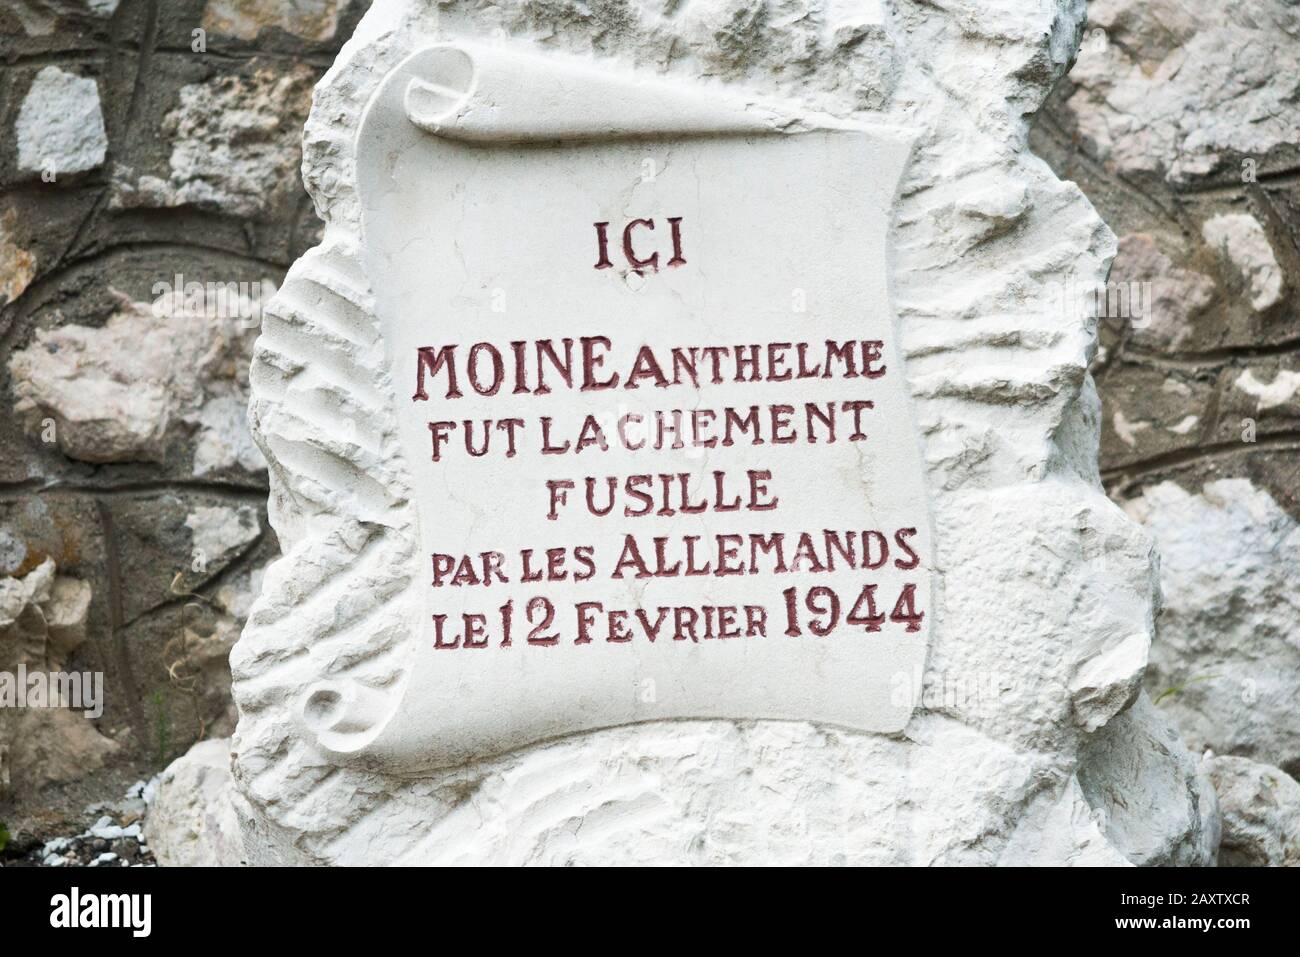 Monument where Monk Anthelme was shot / executed in a cowardly fashion by German Nazis forces in February 1944, during World War Two / 2 / II / WW2 in Ain, France, which was under the authority of Vichy France (112) Stock Photo